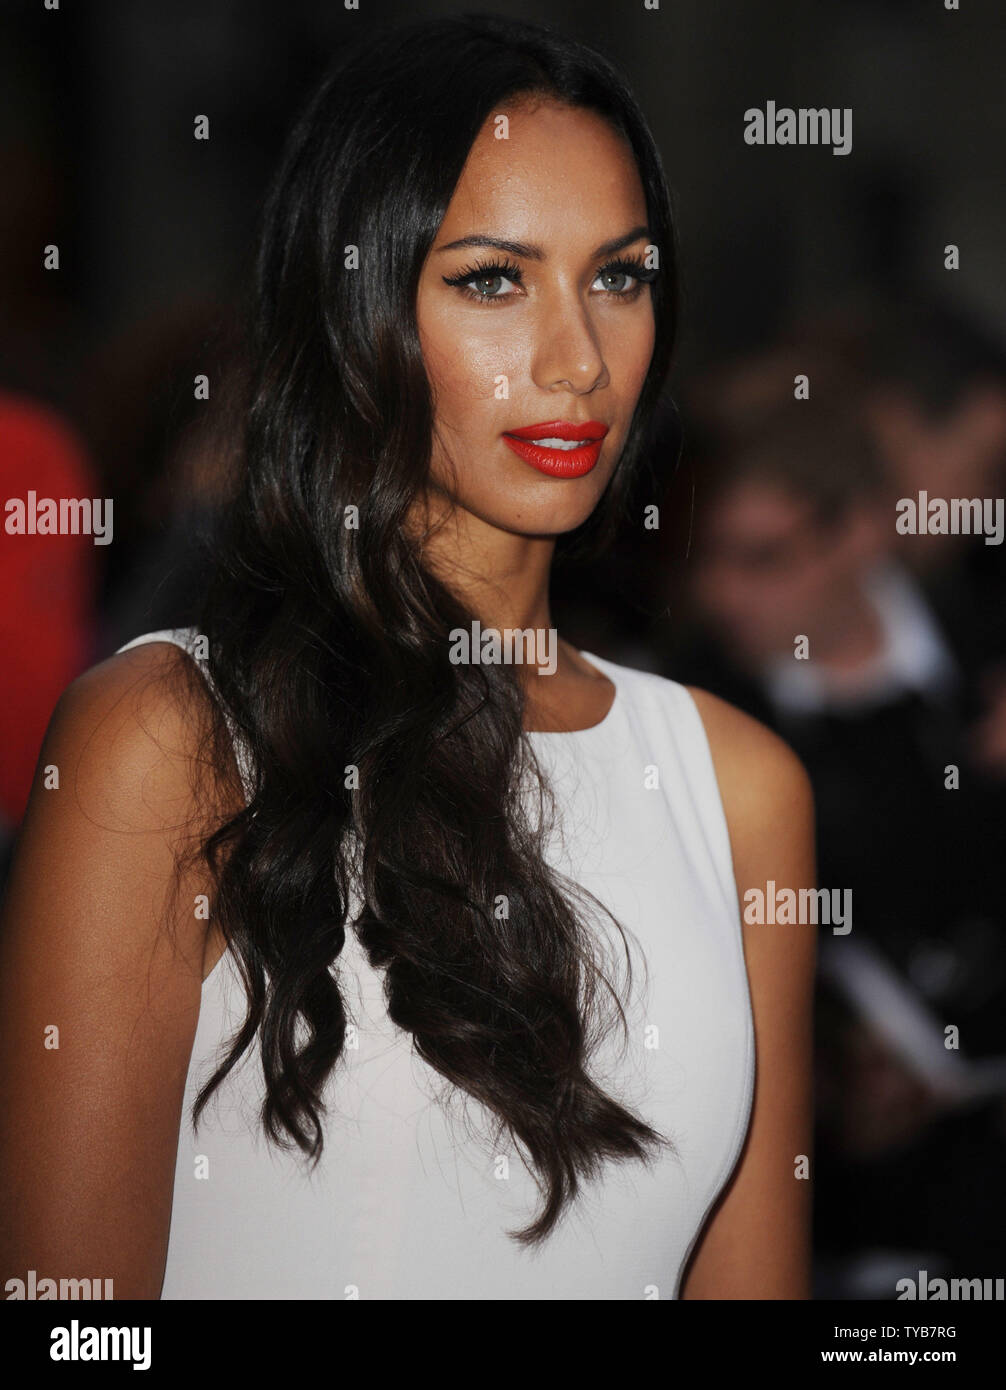 British singer Leona Lewis attends the 'GQ Men Of The Year Awards' at Royal Opera House in London on September 6, 2011.     UPI/Rune Hellestad Stock Photo